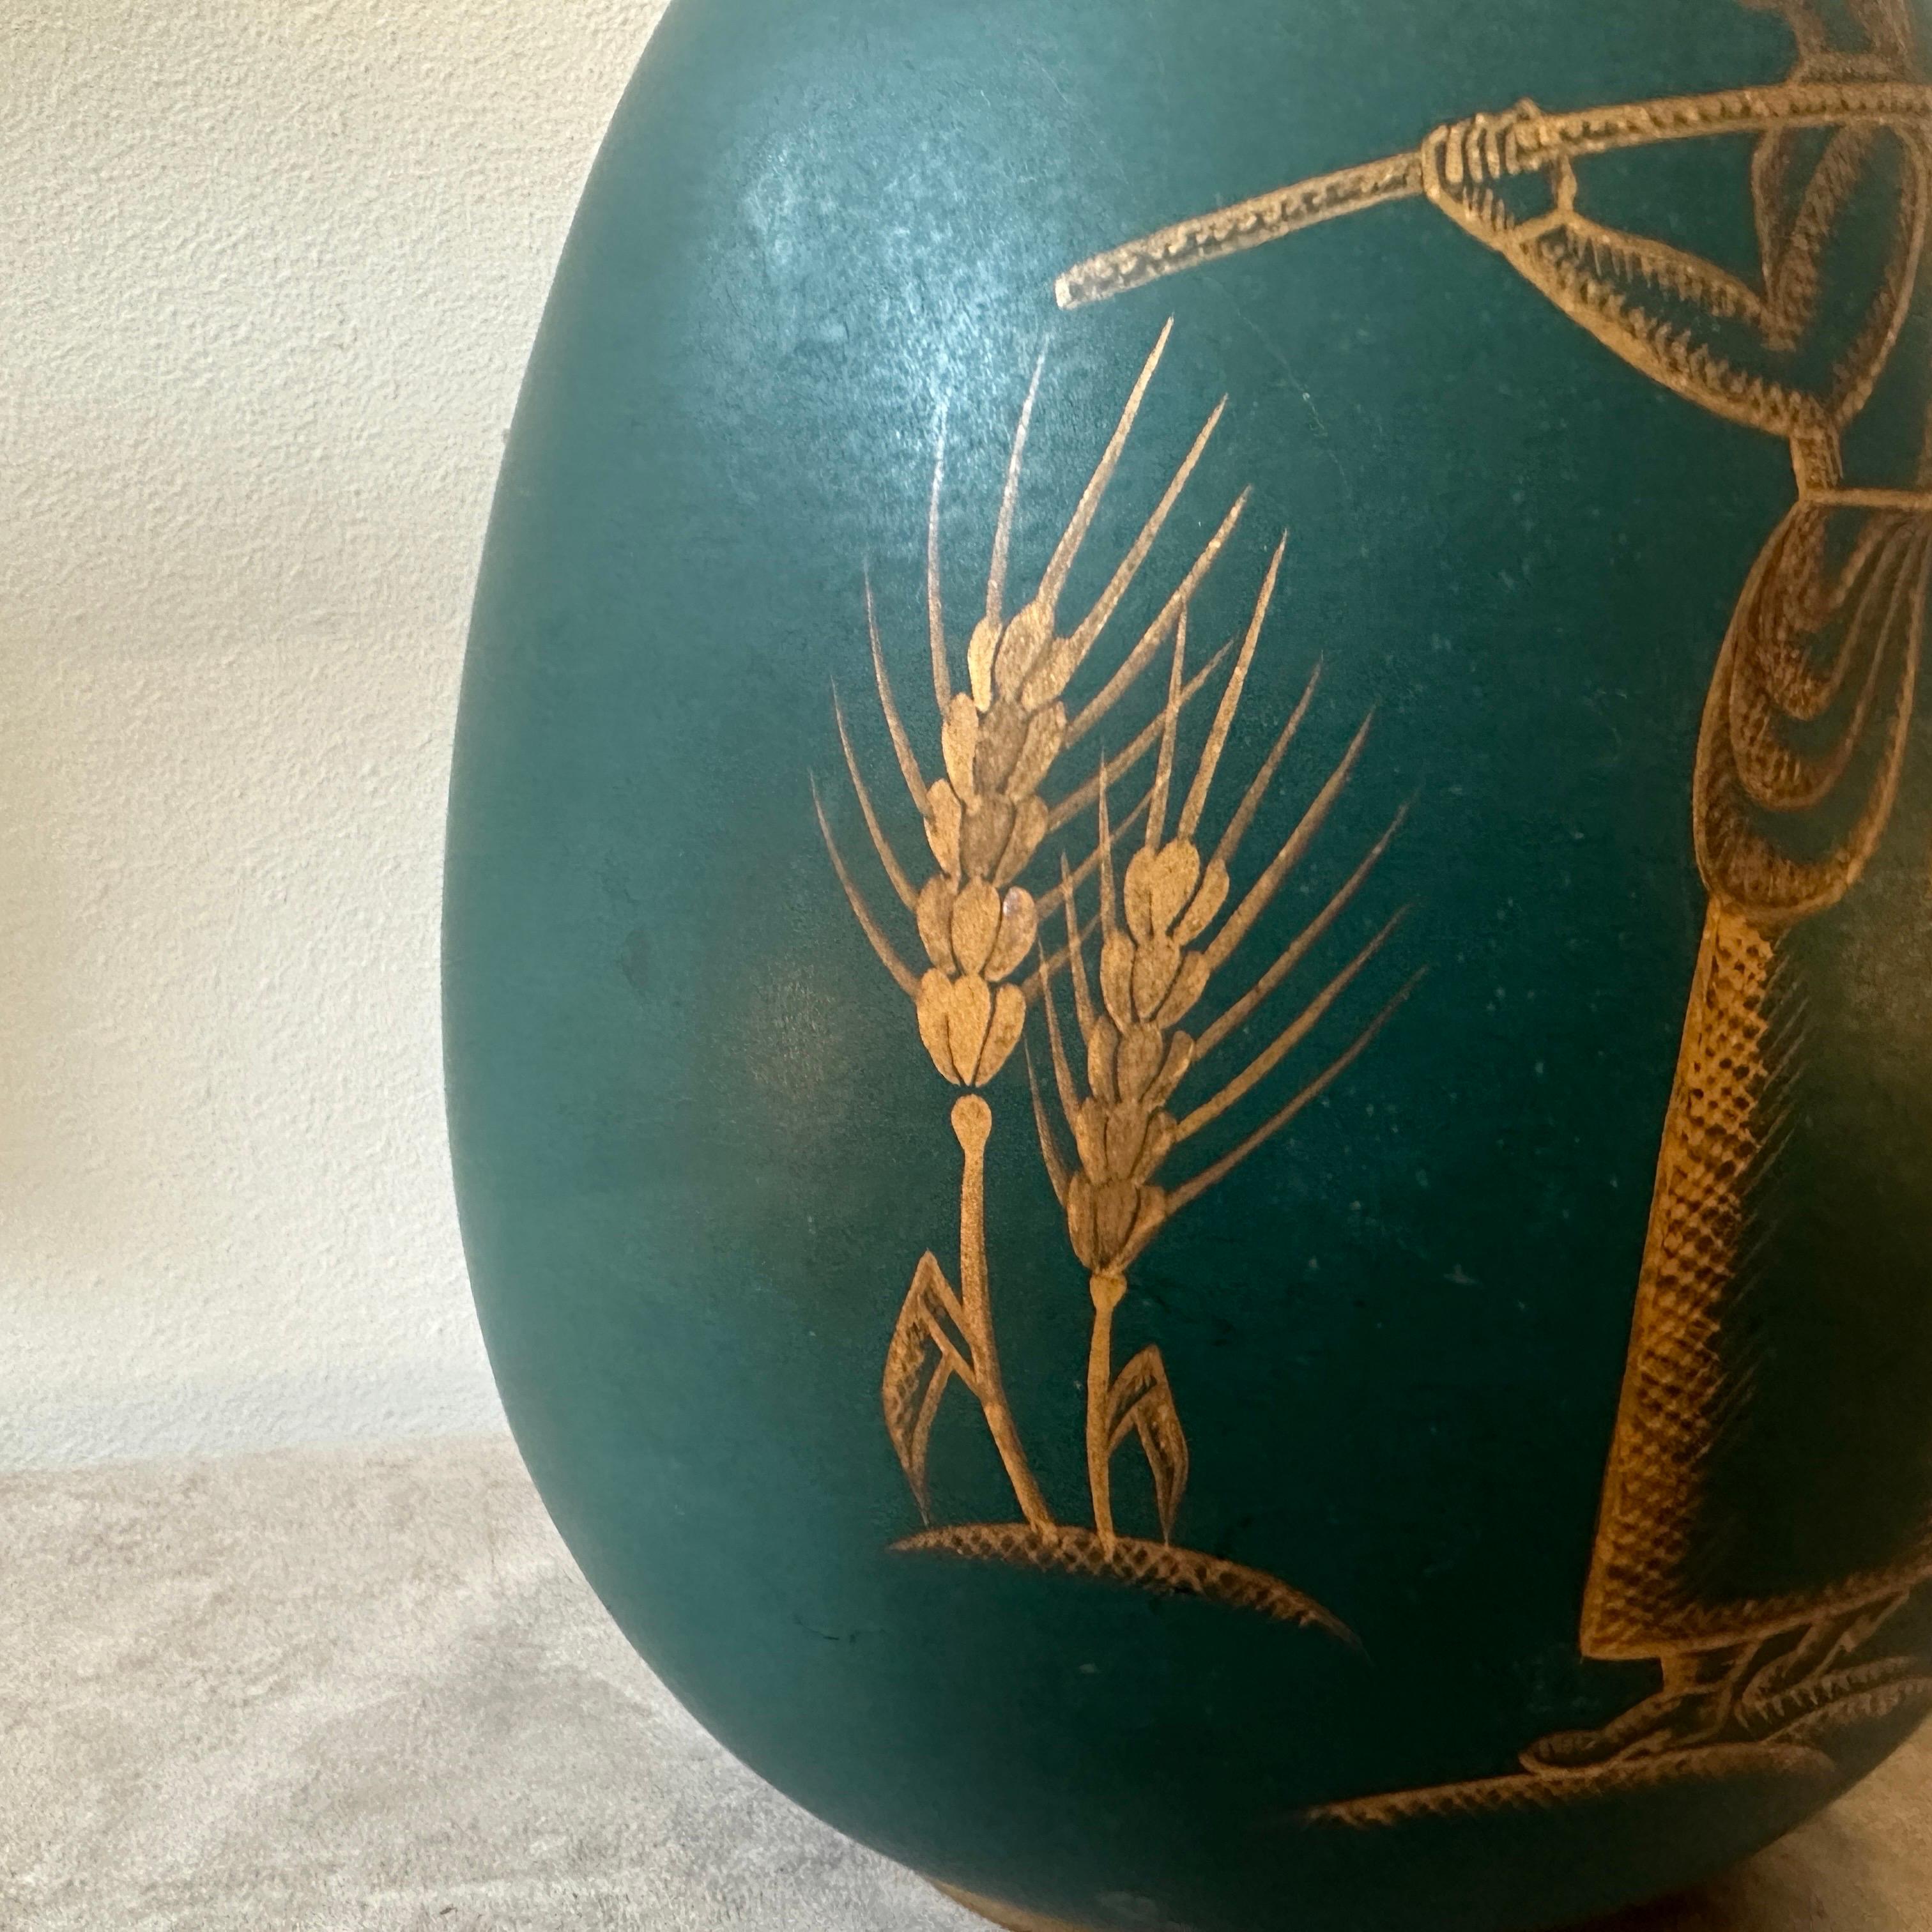 20th Century A 1939 Dated Art Deco Gio Ponti Inspired Green and Gold Ceramic Sicilian Vase For Sale